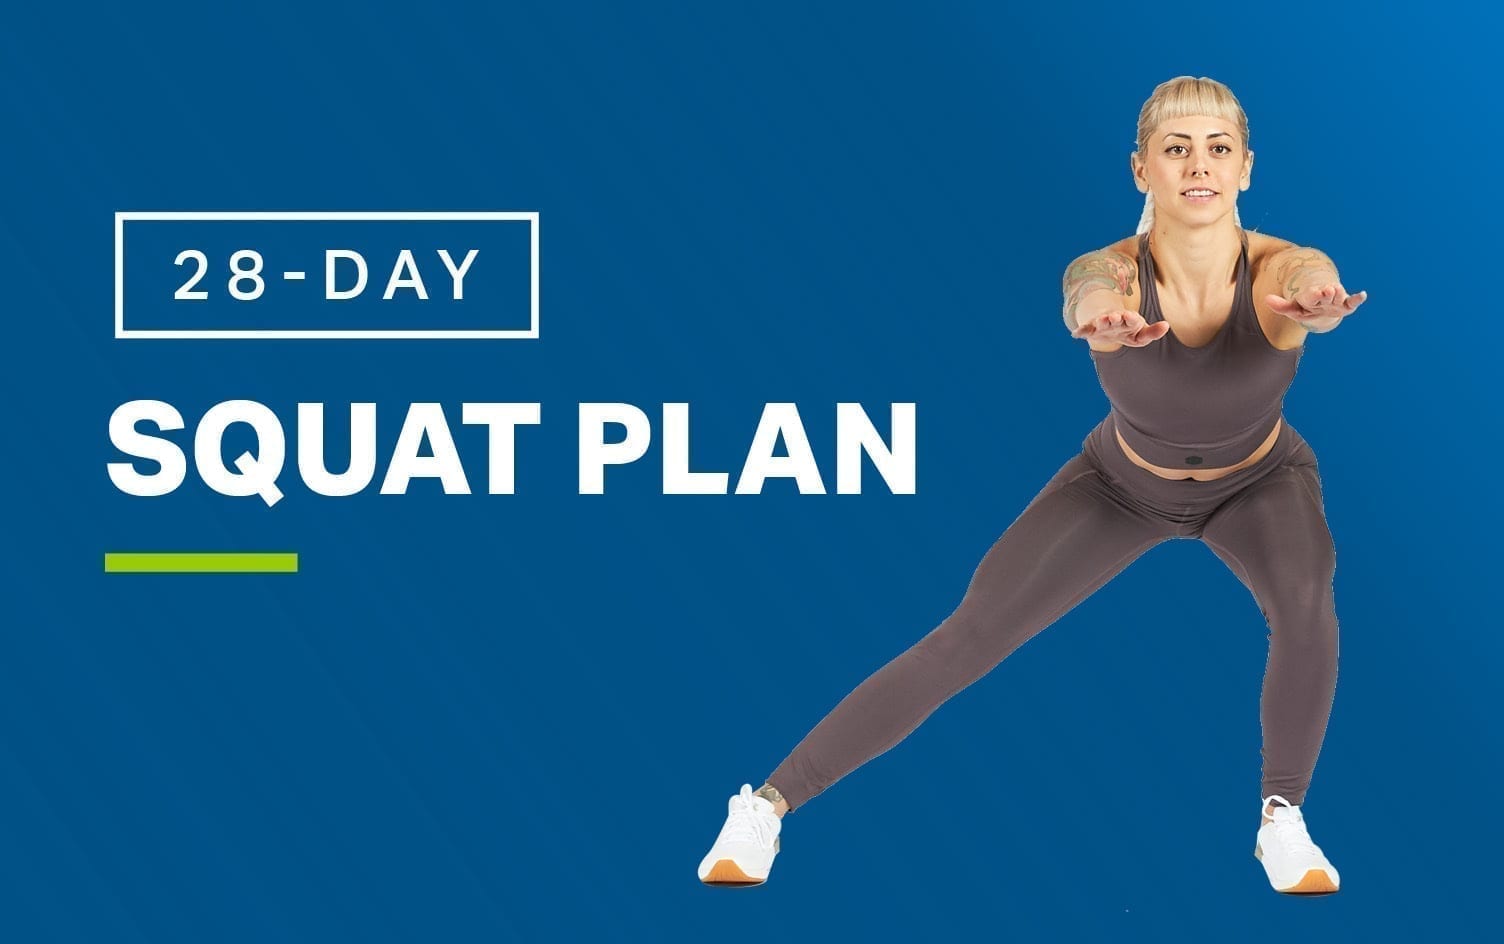 Bodyweight squat exercise instructions and video